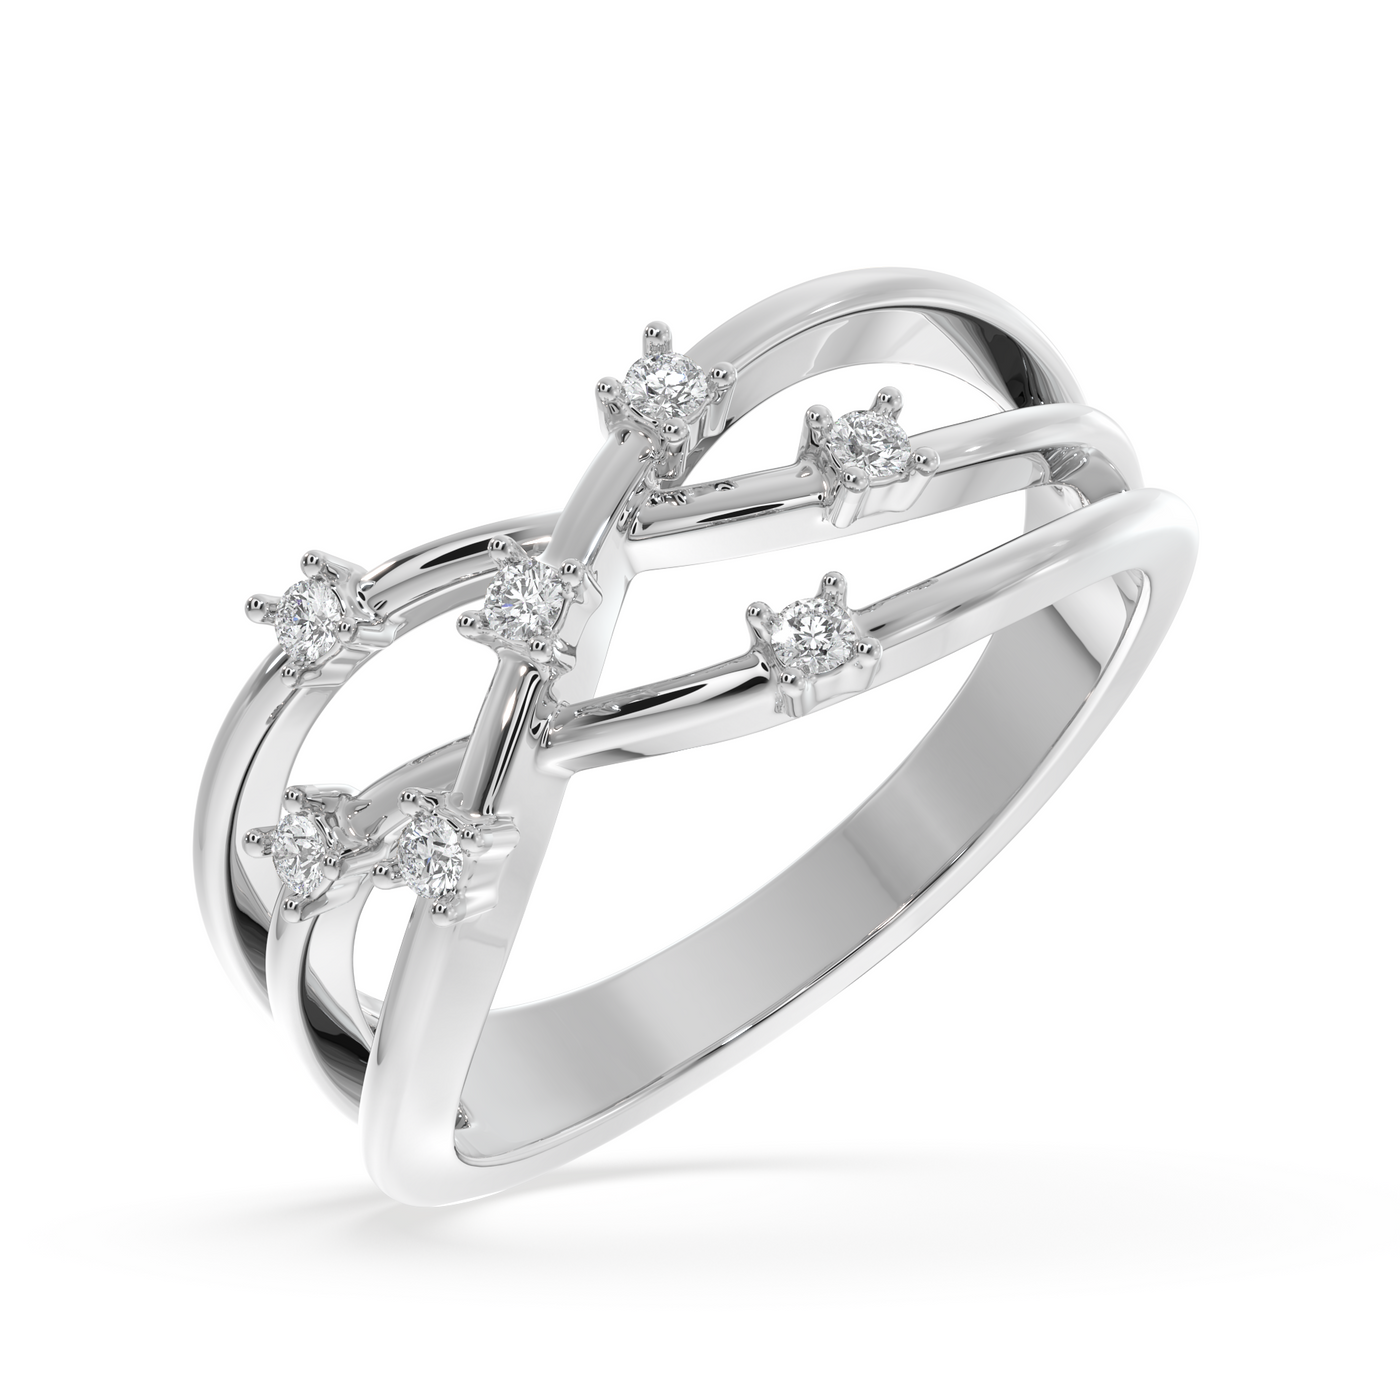 SY Women's Ring in Platinum, Whispering Winds Diamond